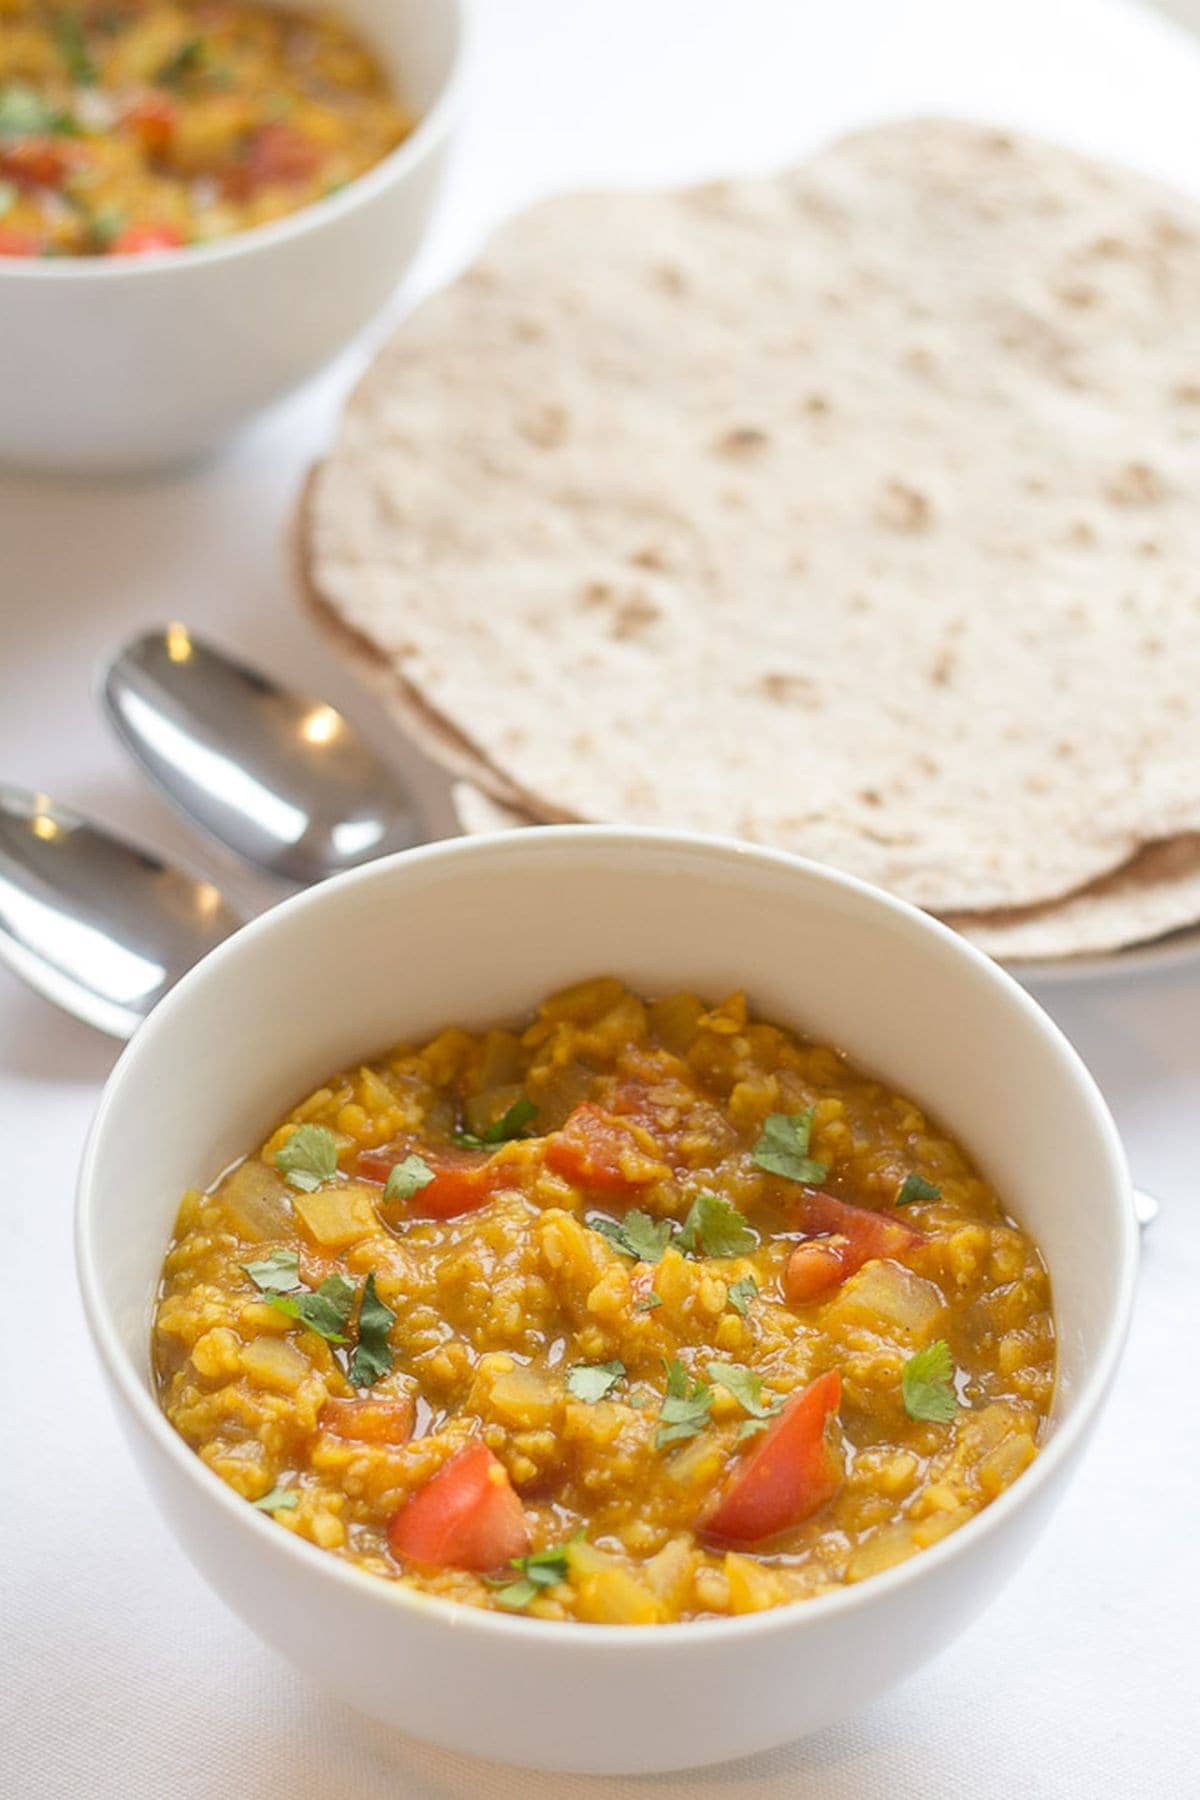 A bowl of moong dall dahl with naan breads in the background and spoons in between.